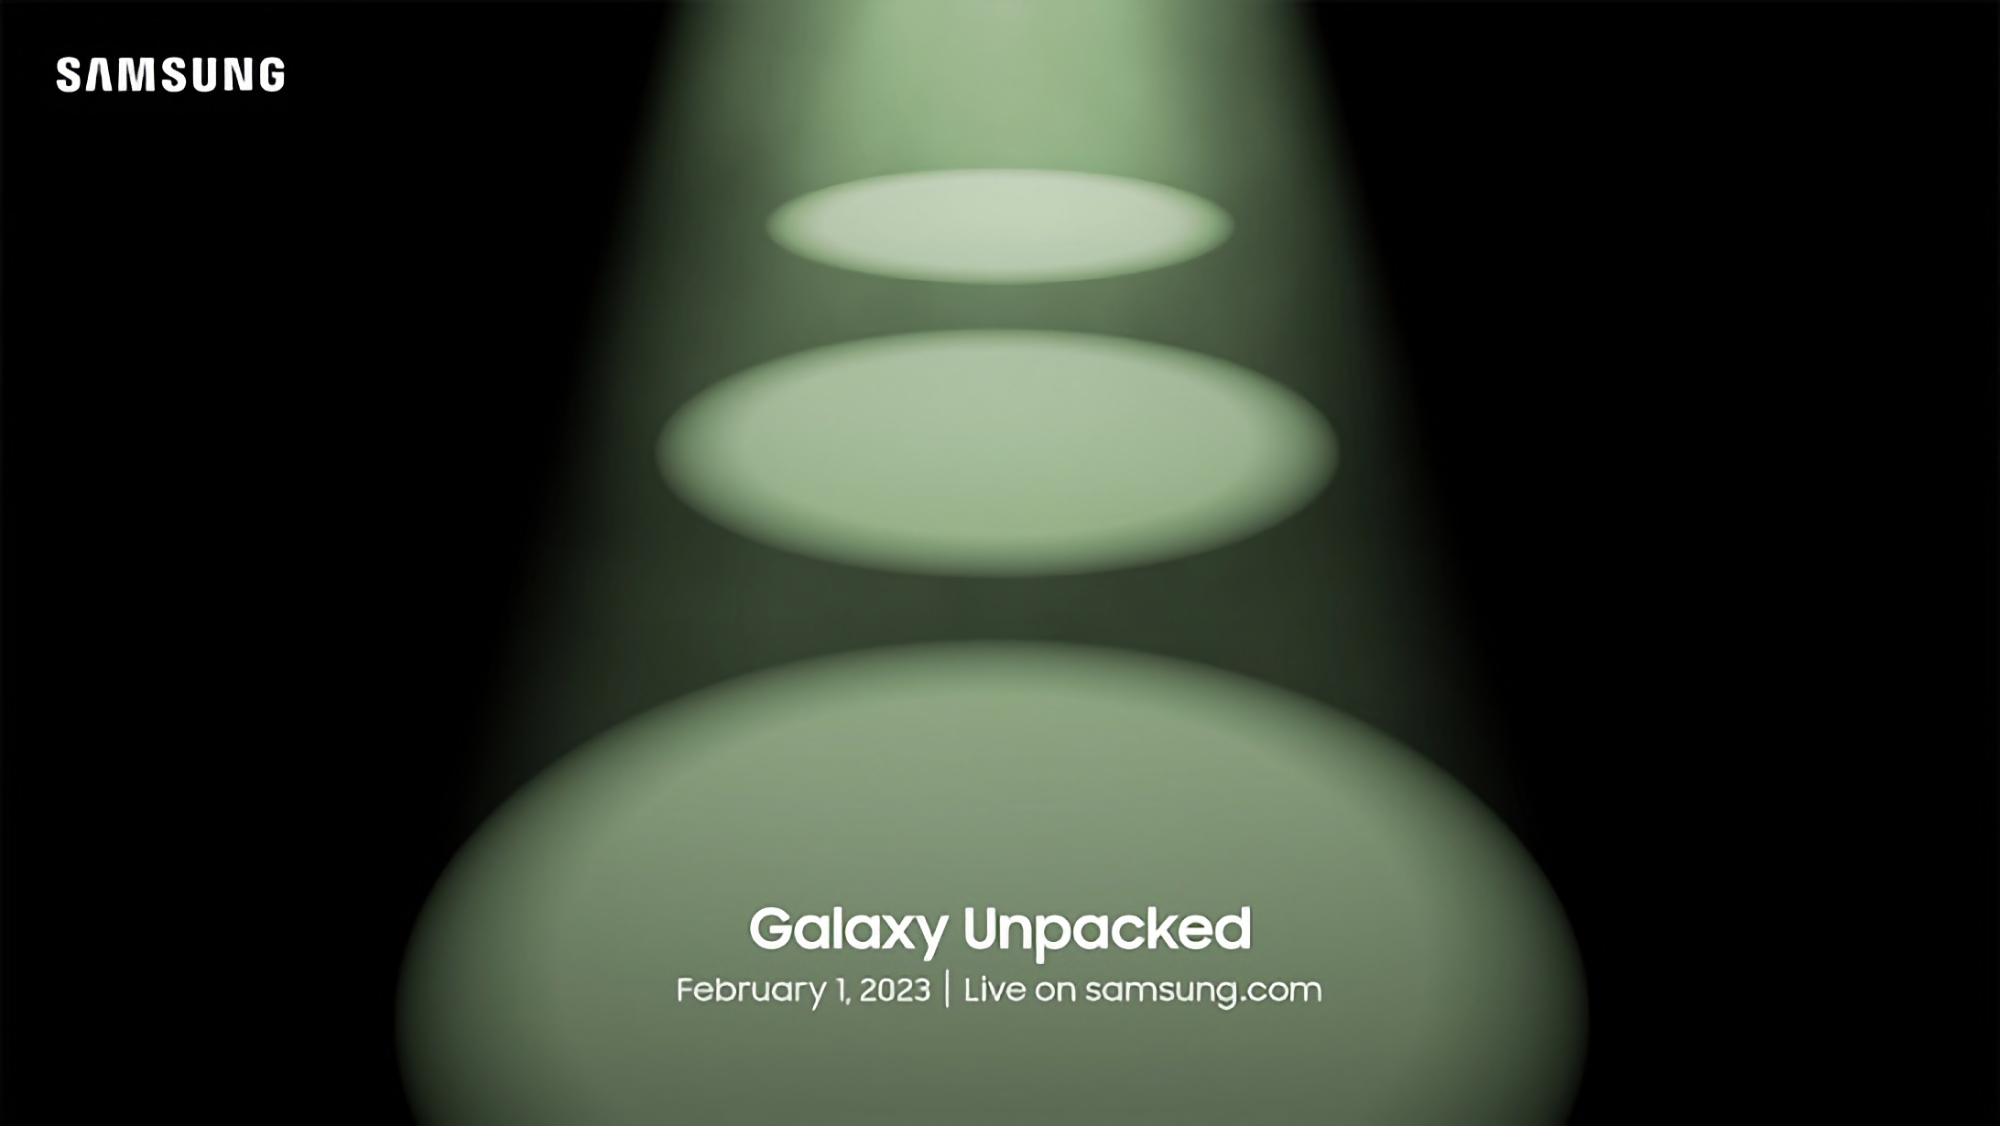 Now it's official: Samsung will show the Galaxy S23 flagships at the Galaxy Unpacked presentation on February 1